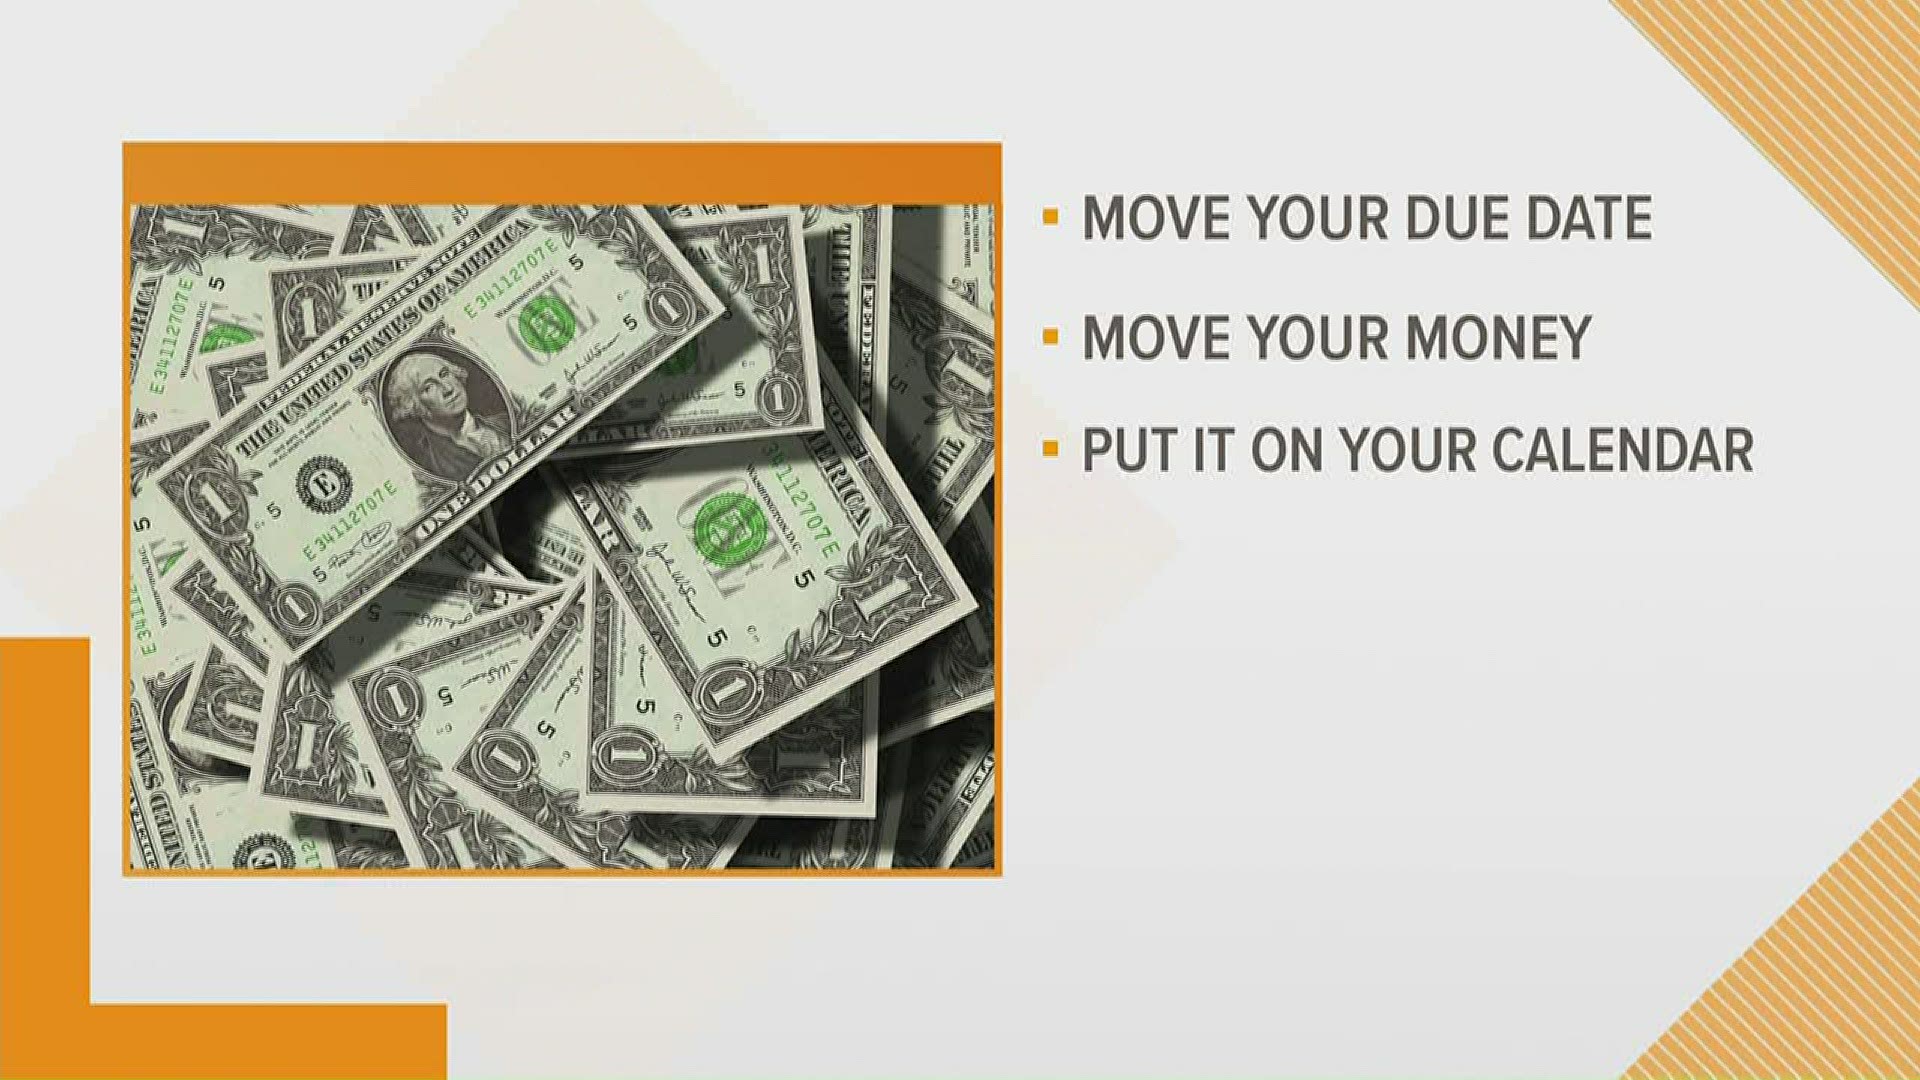 Know Money Inc.'s Steven Hughes provides three ways to help improve your monthly cash flow.